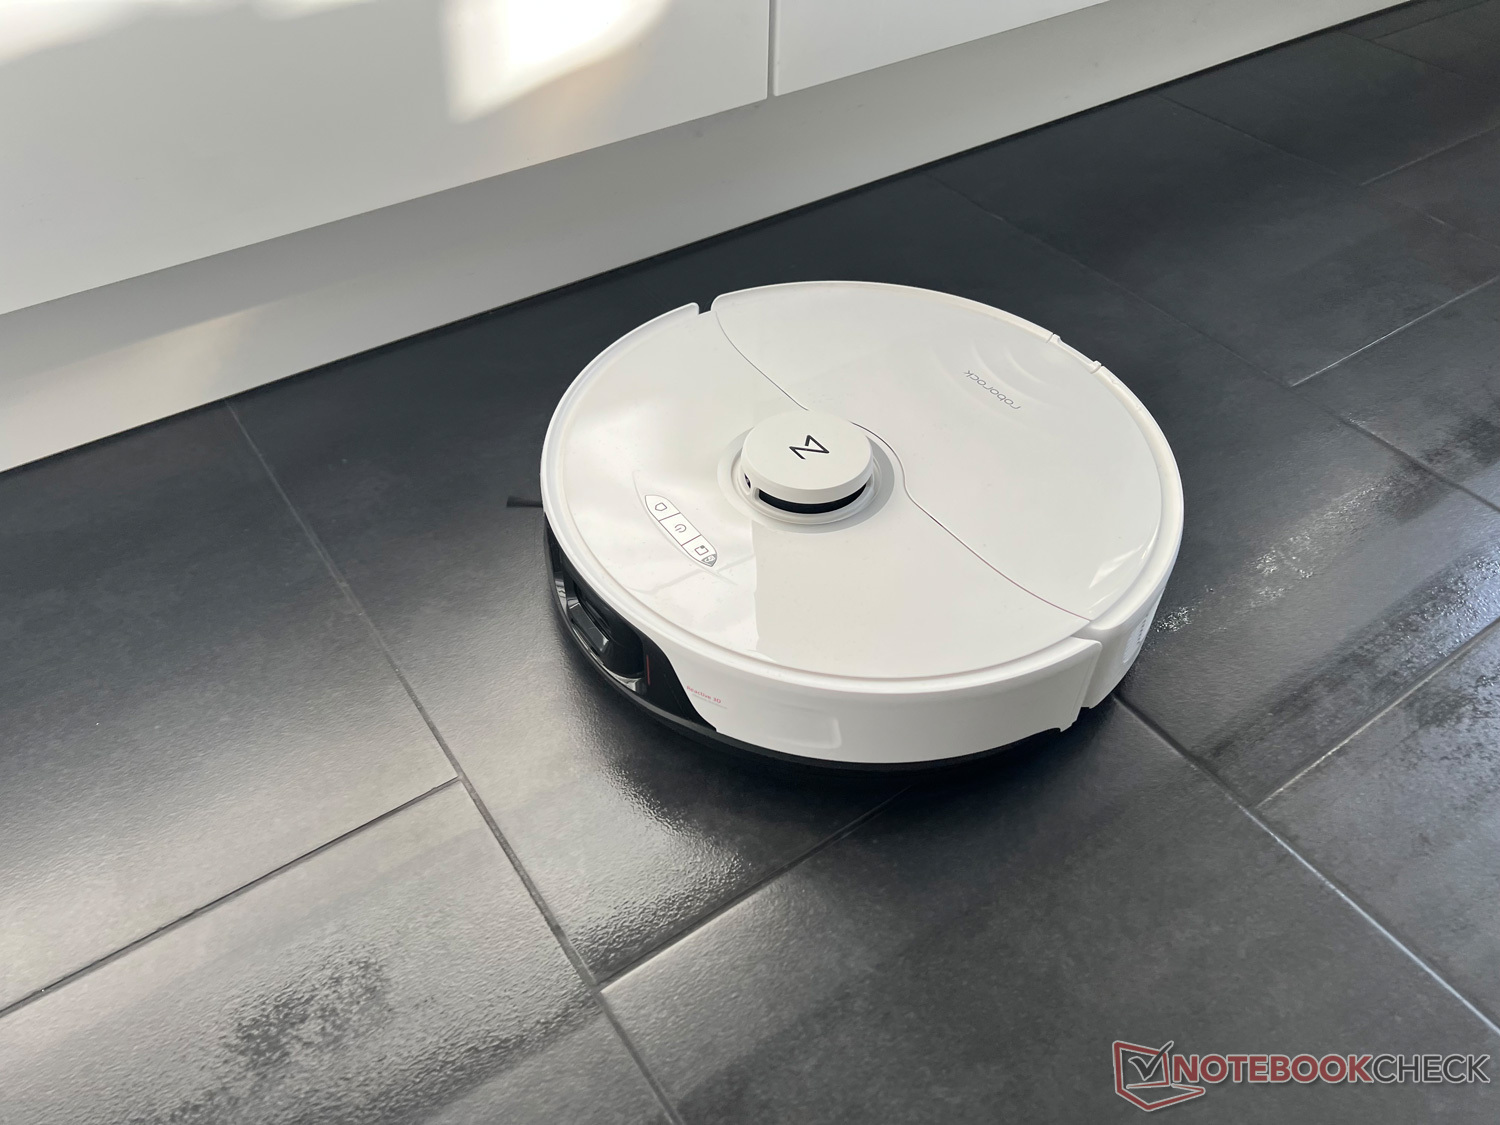 This mop and vacuum robot cleans itself so you don't have to - CNET